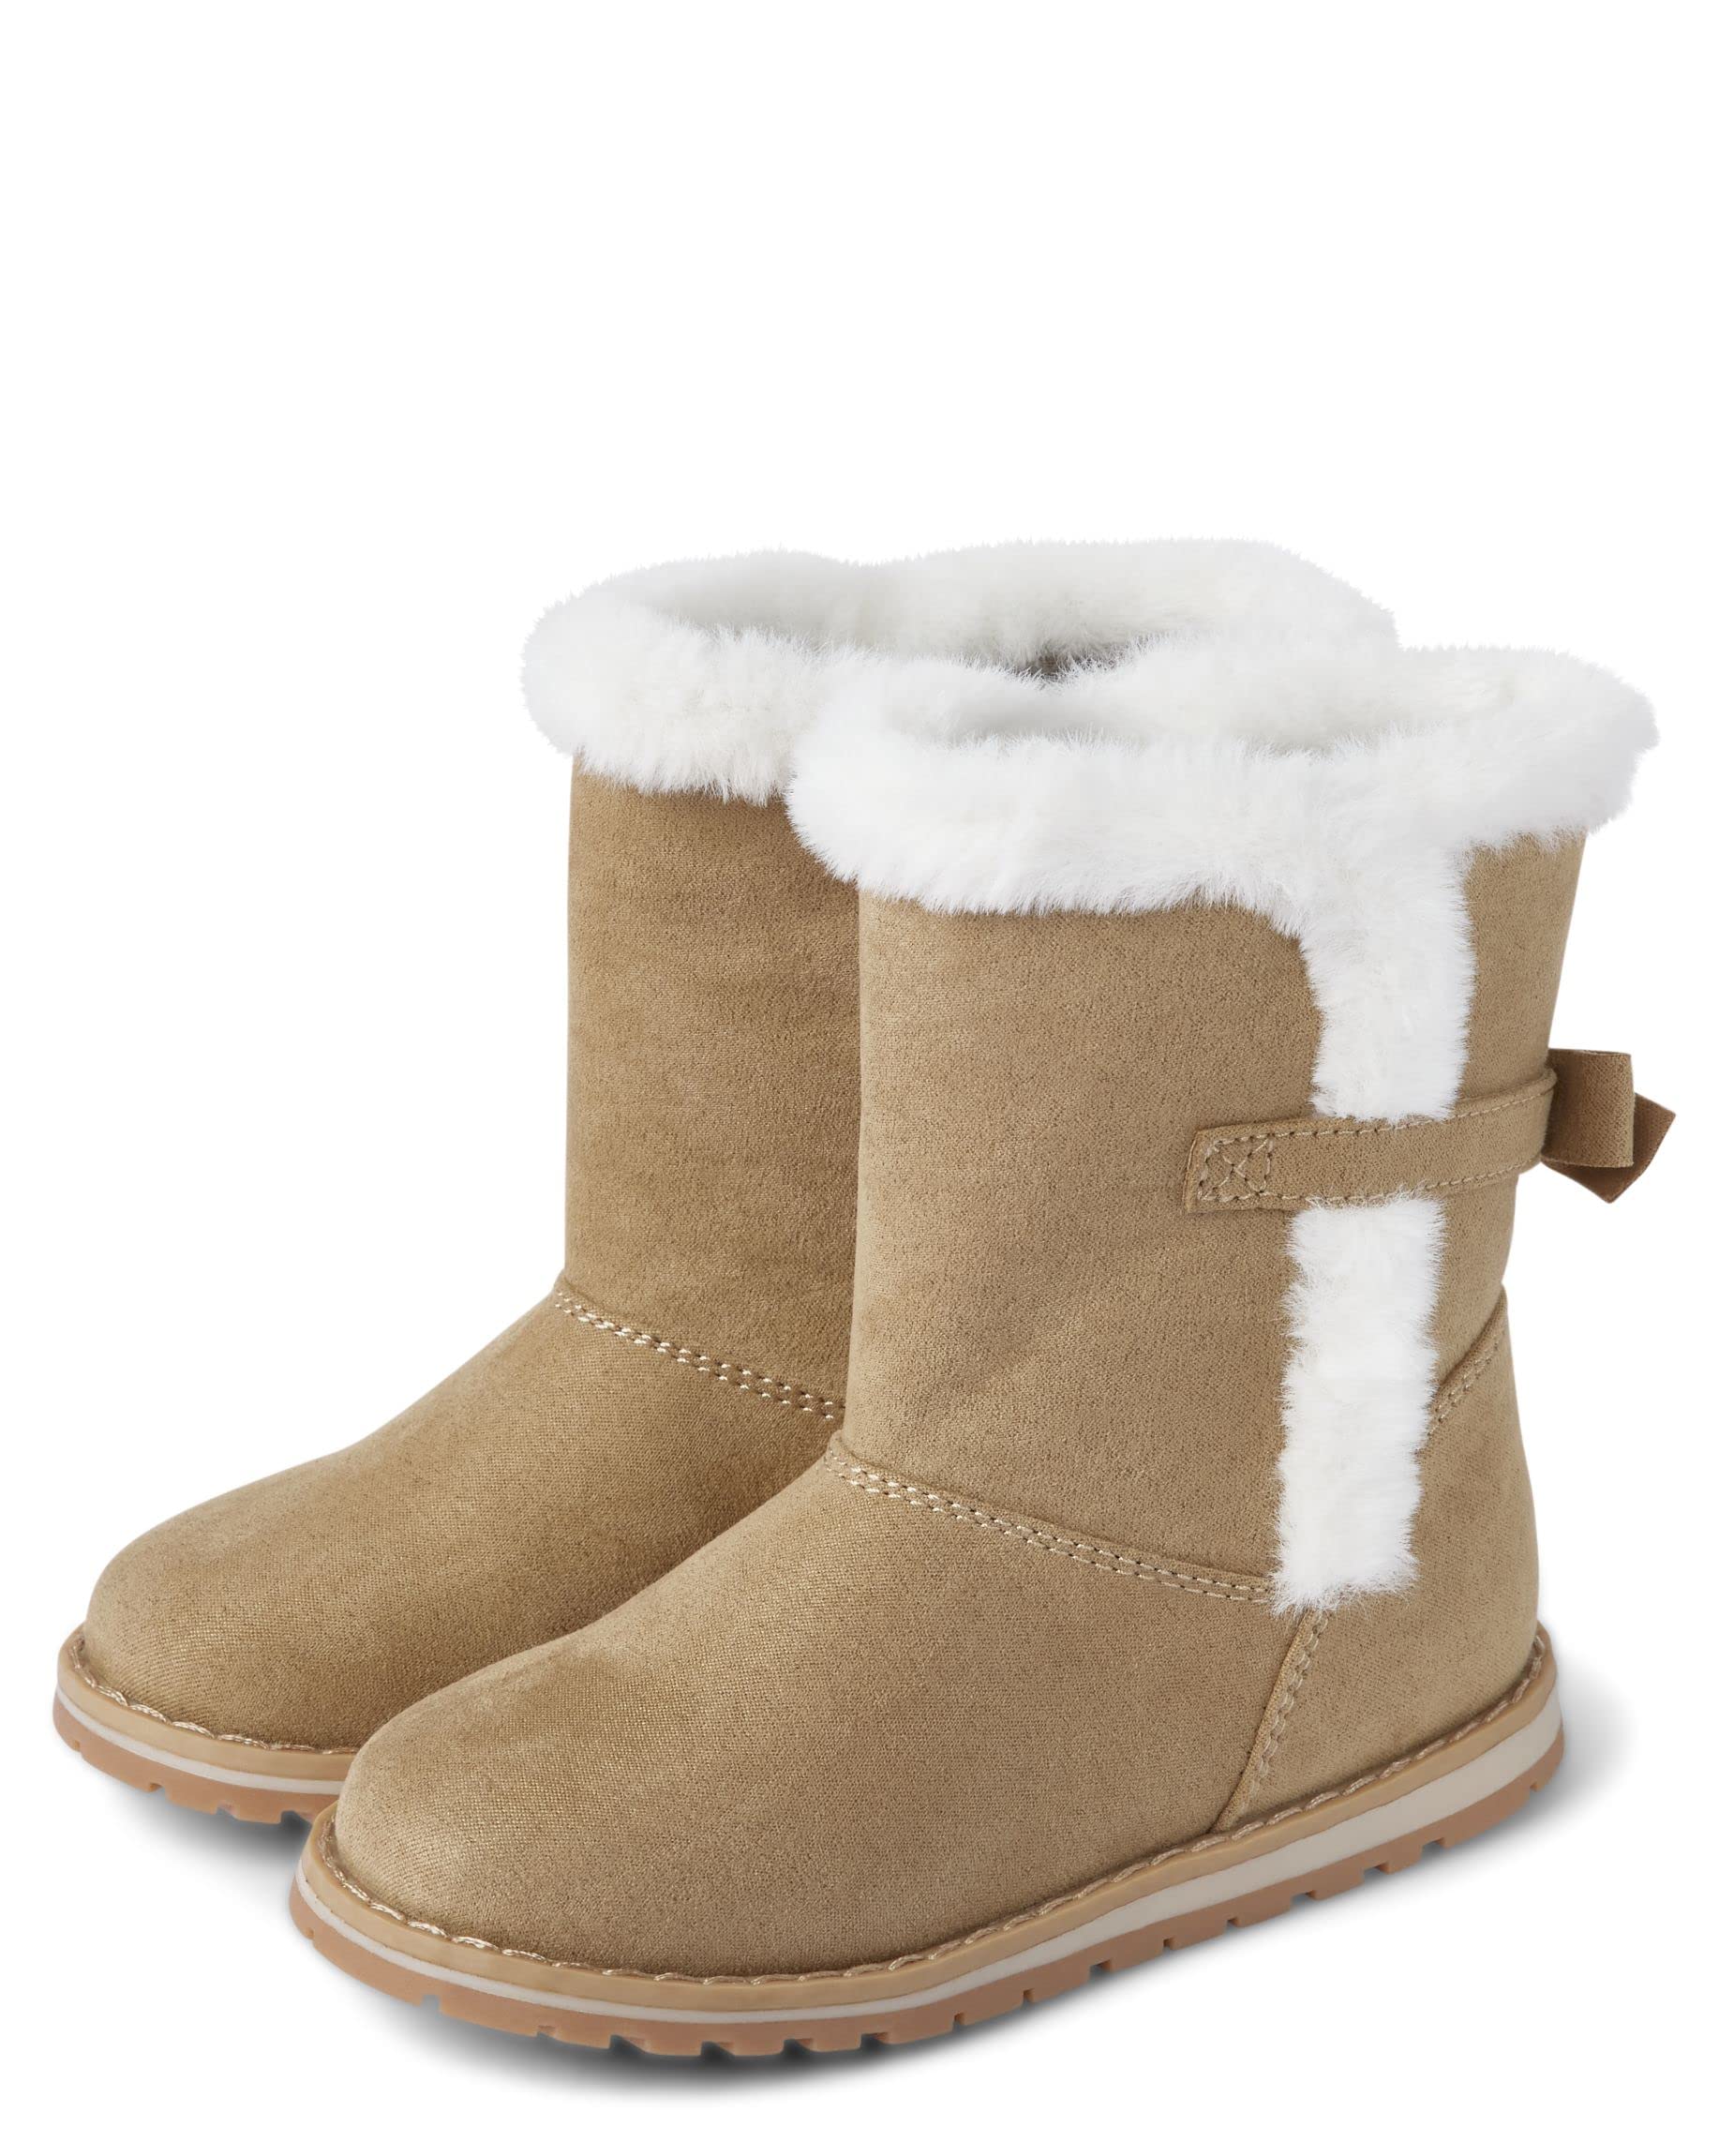 Gymboree Girl's and Toddler Casual Boots Fashion